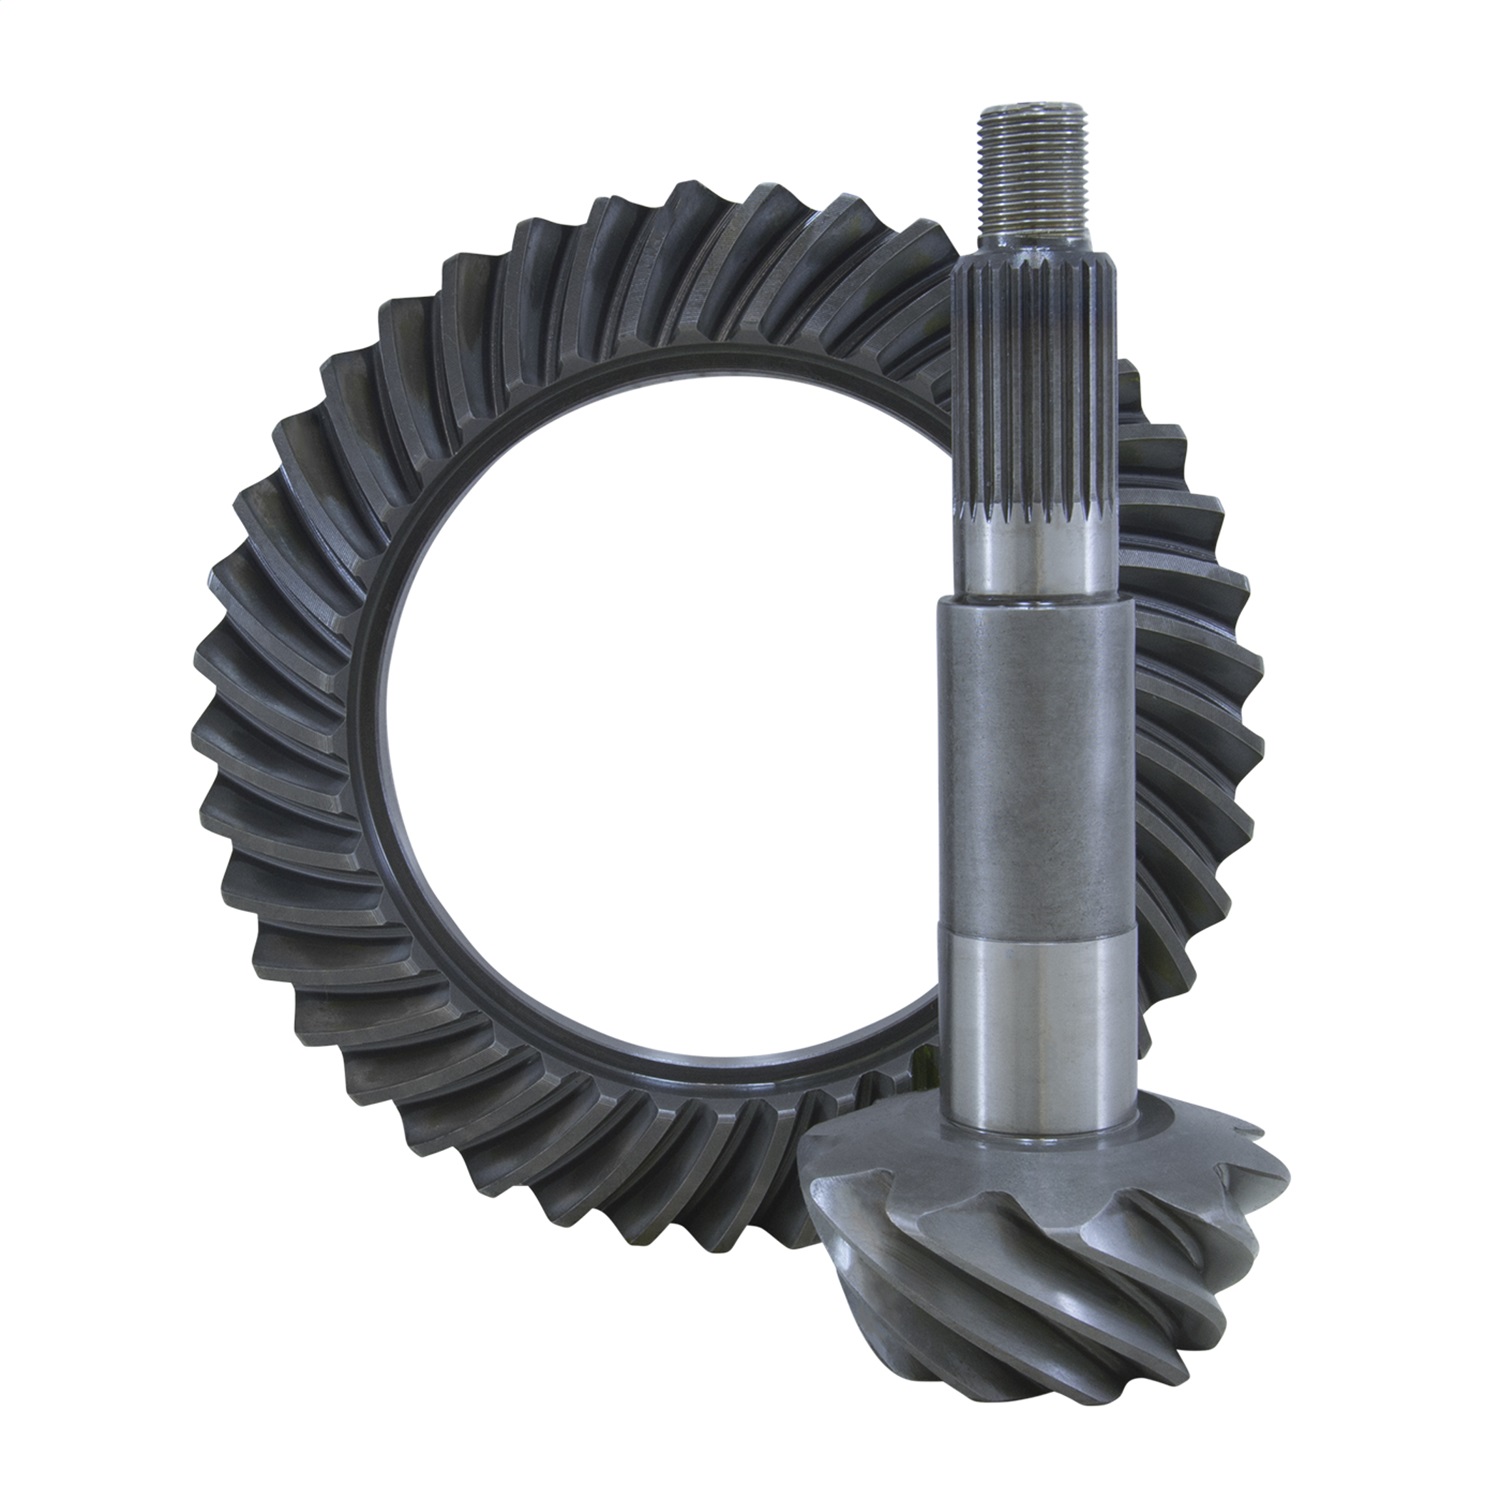 USA Standard Gear ZG D44-308 Ring And Pinion